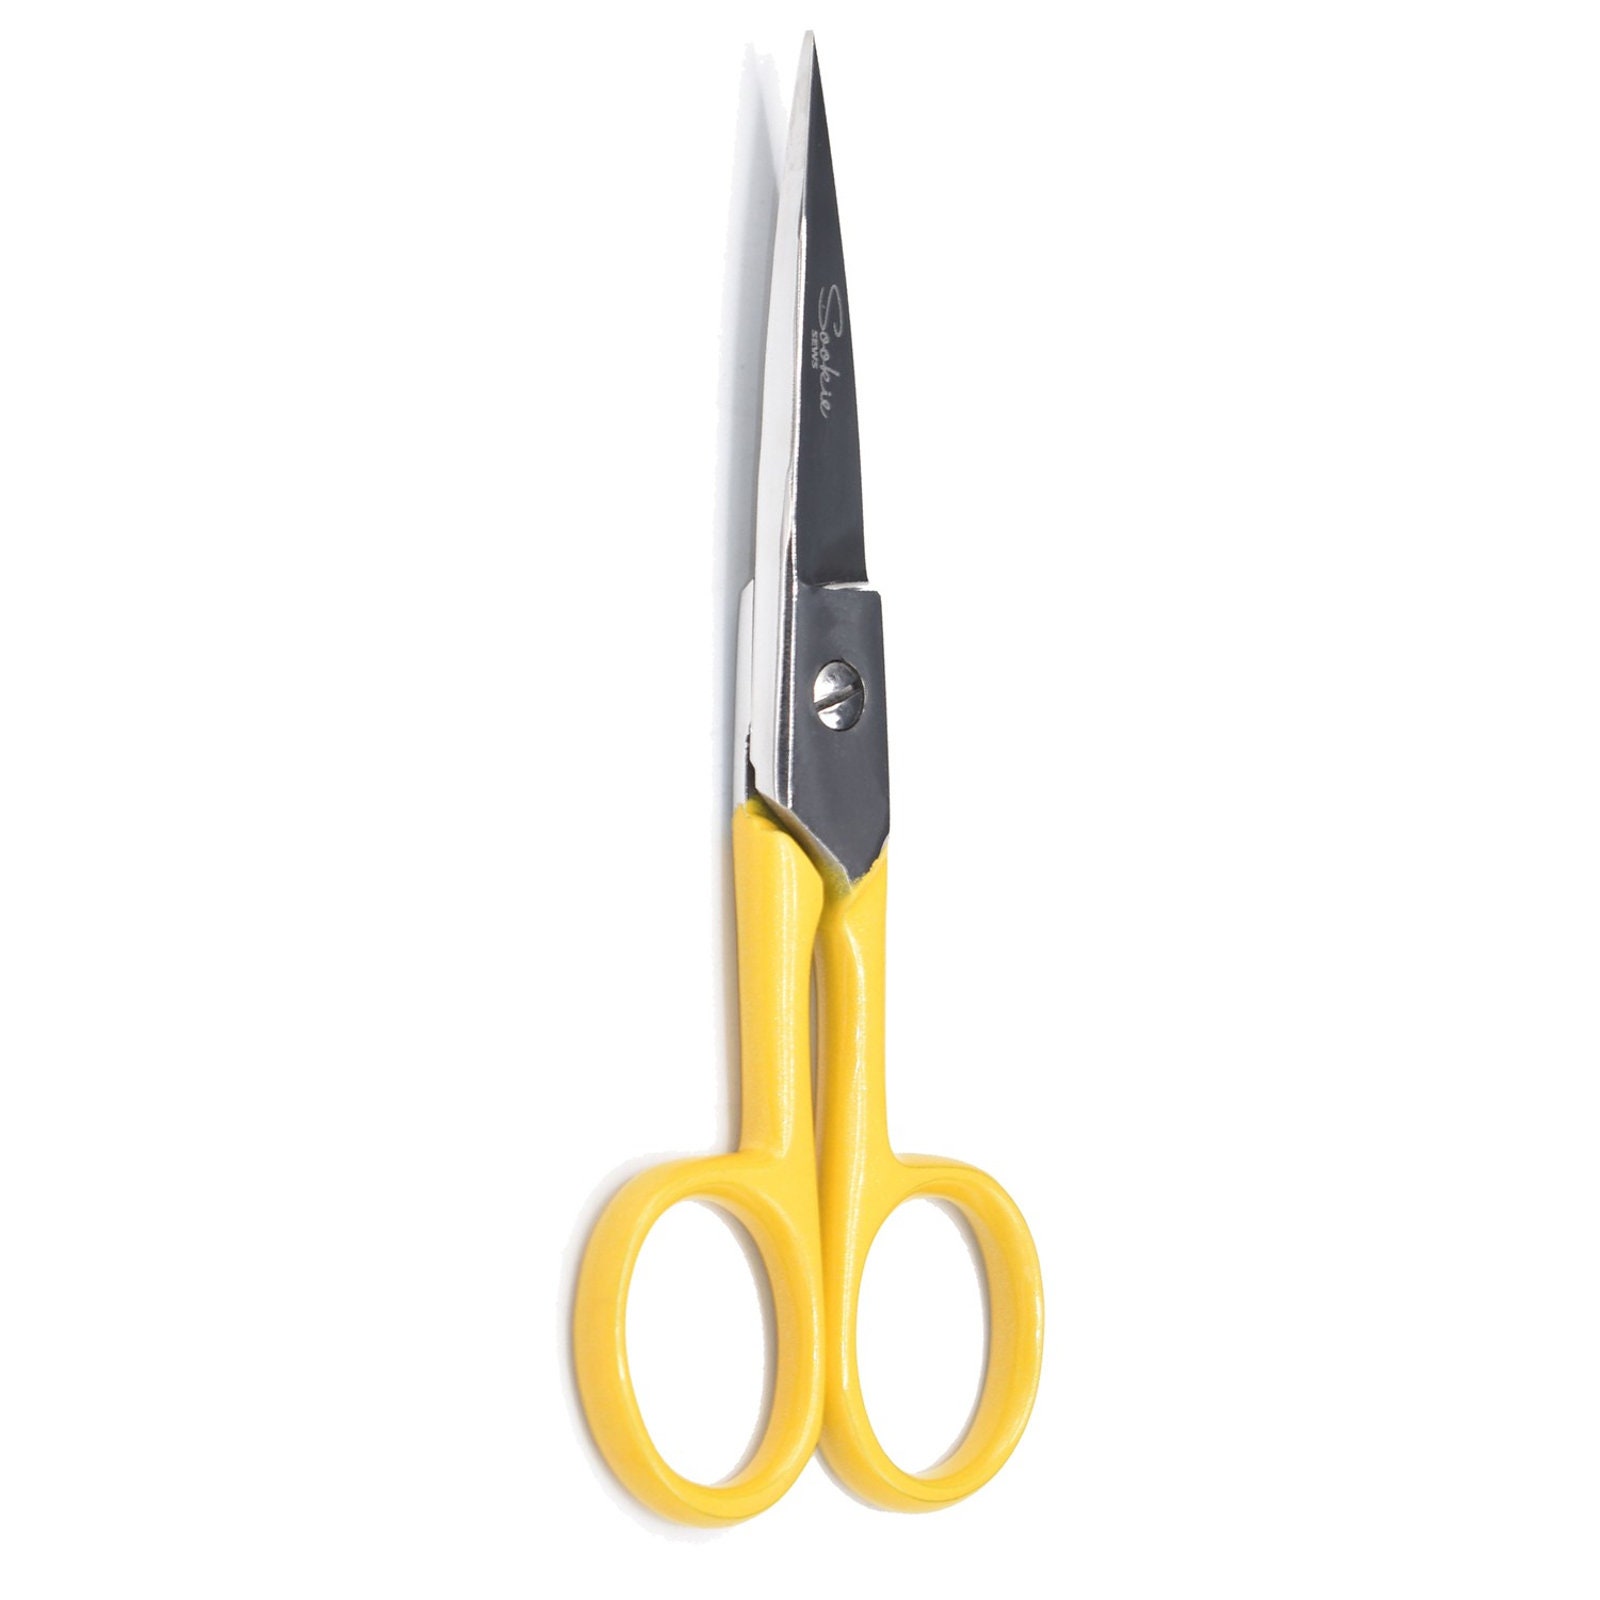 Famore True Left Handed 4 Inch Fine Point Mini Double Curved Embroidery  Scissors